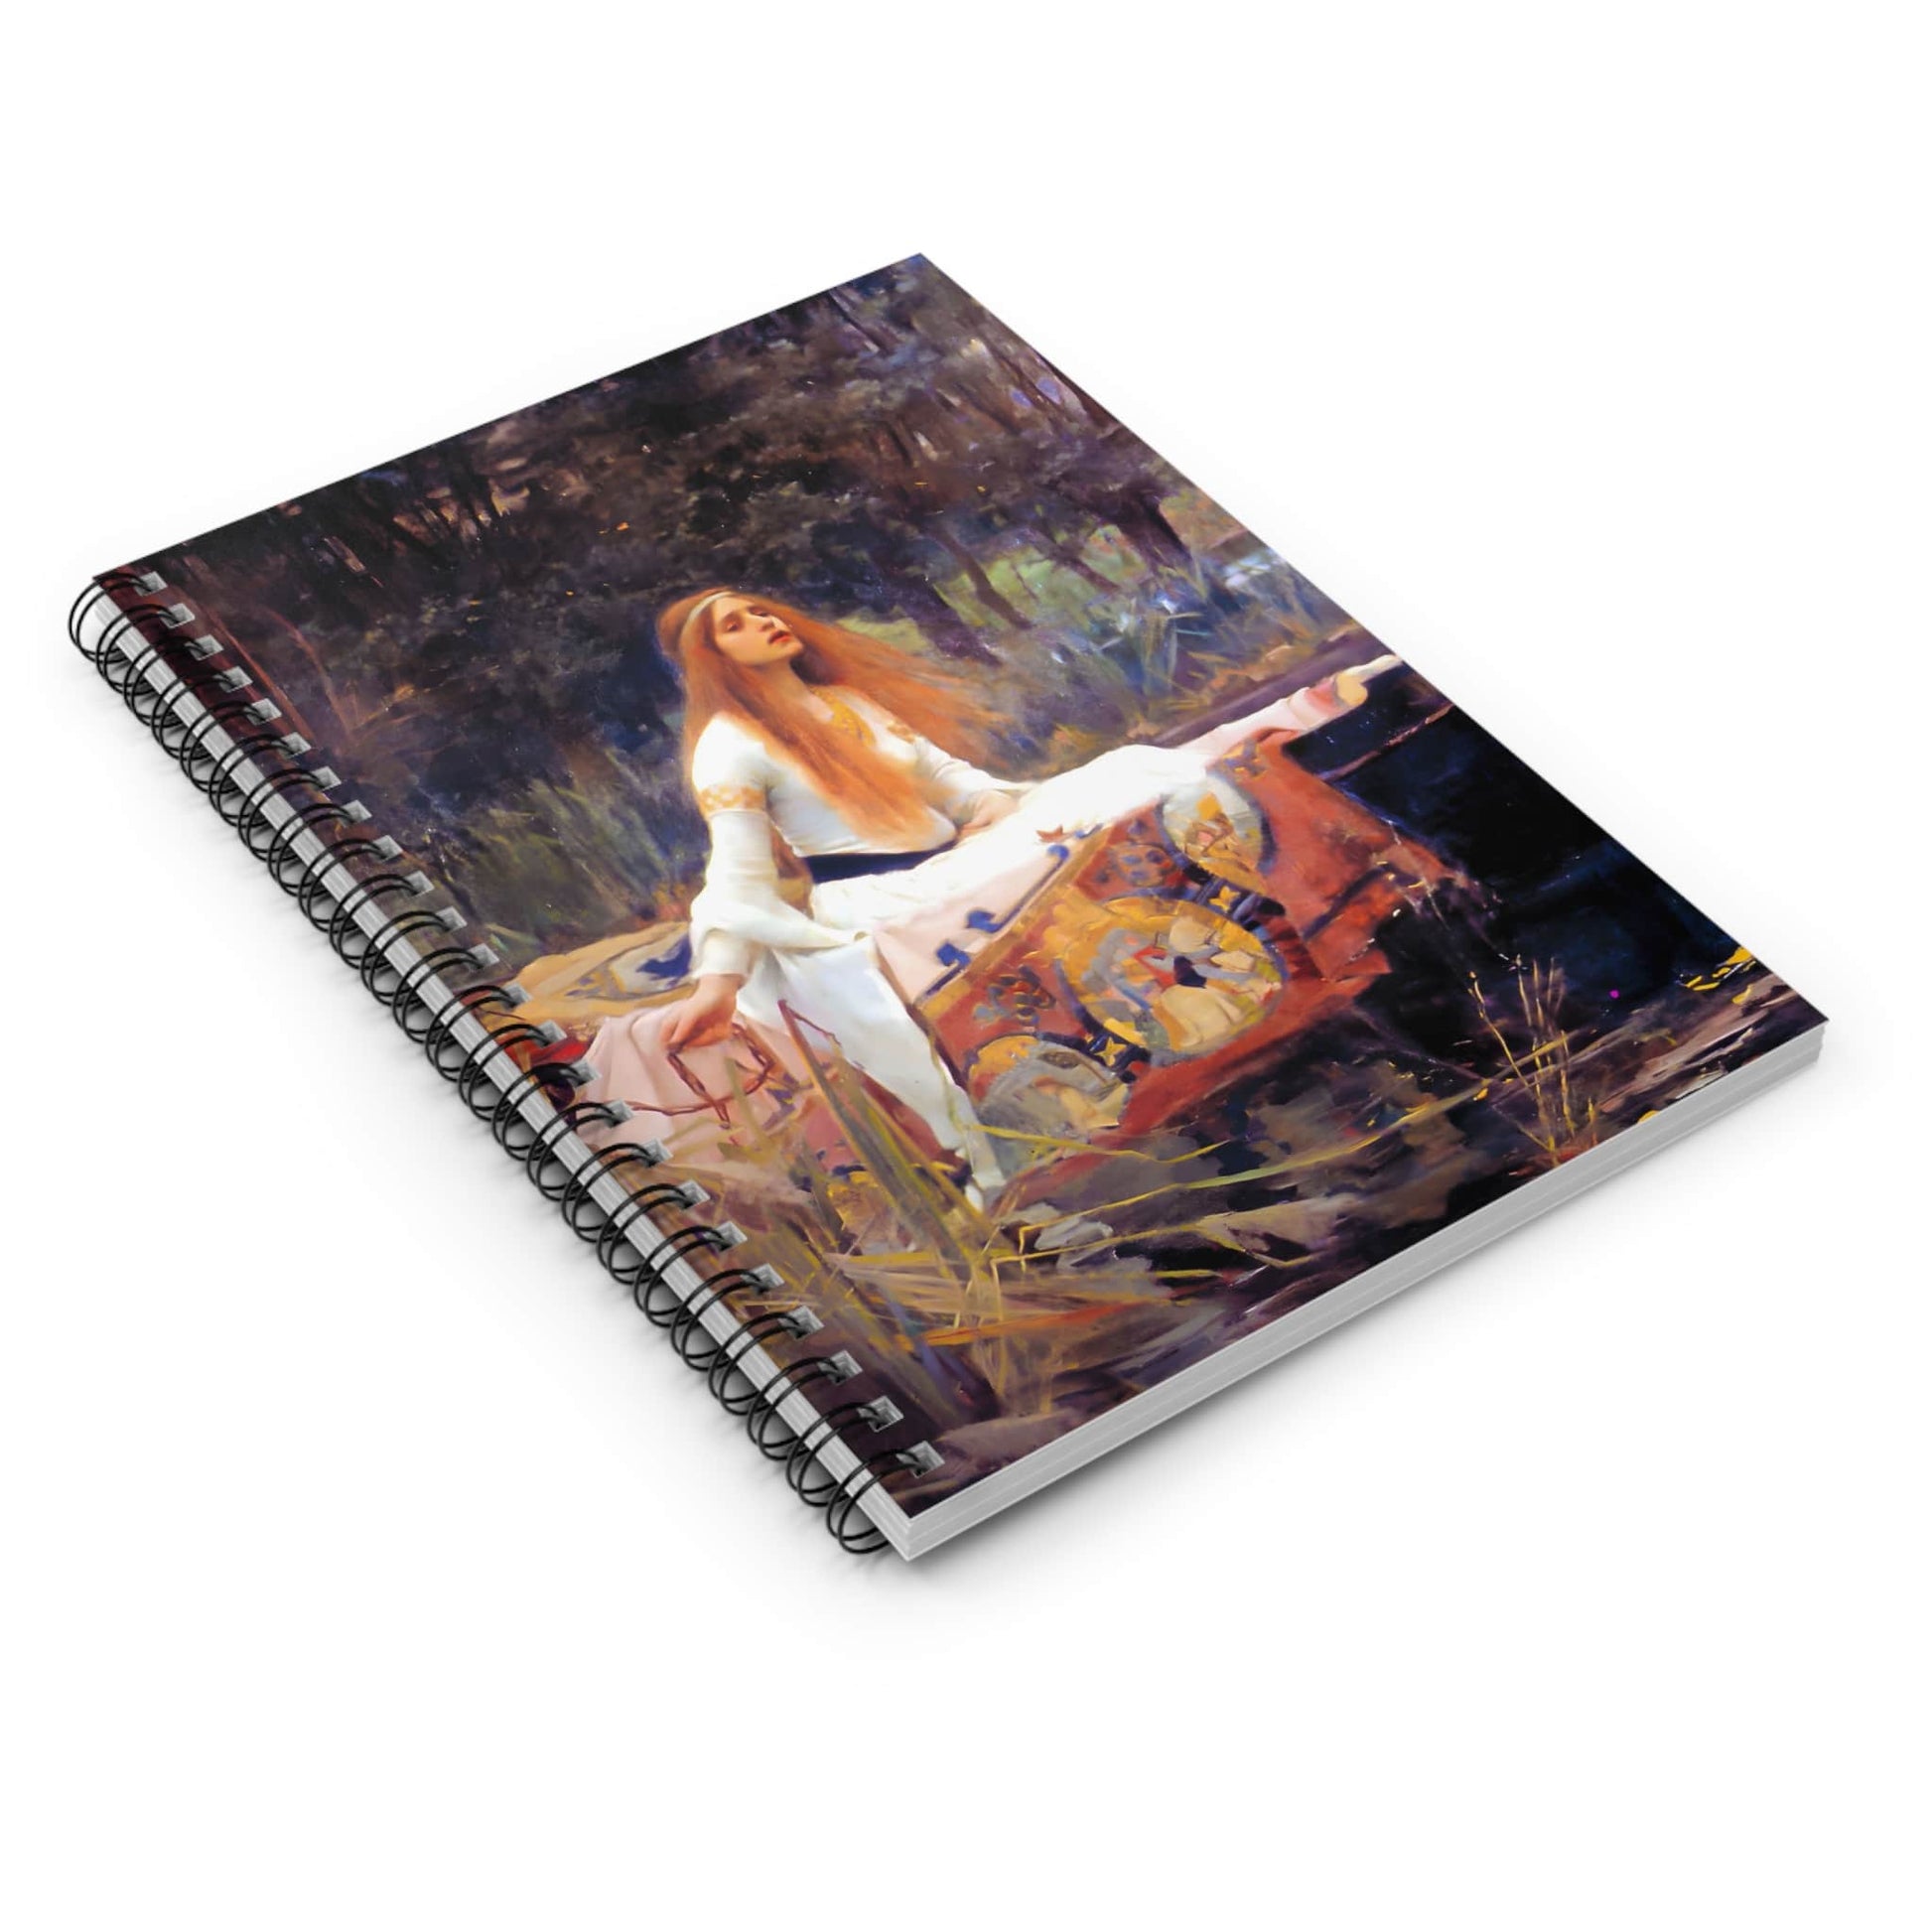 Victorian Era Moody Spiral Notebook Laying Flat on White Surface